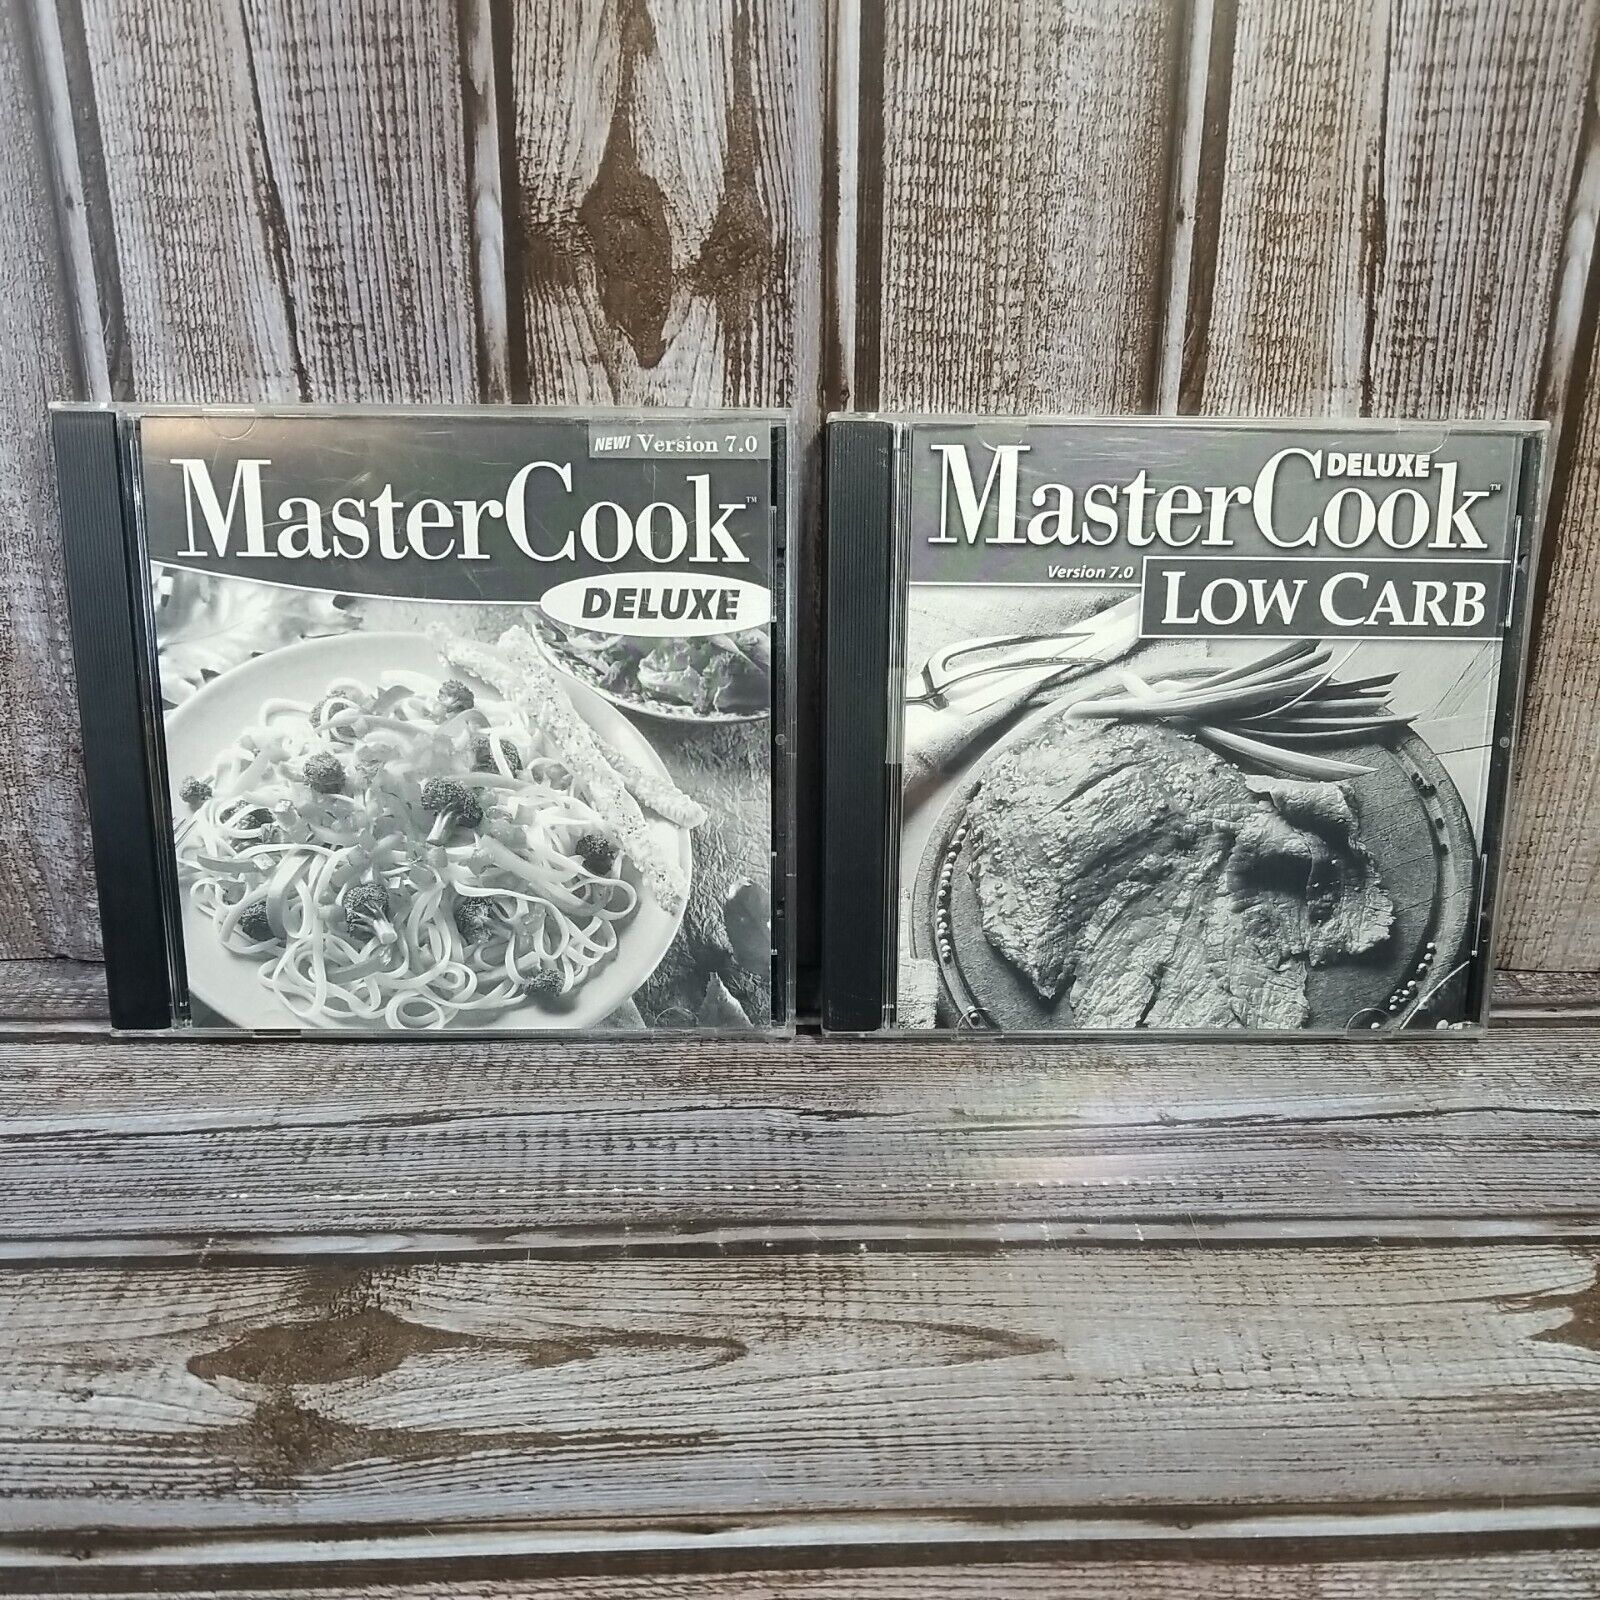 MasterCook Deluxe Version 7.0 CD-ROM Bundle Lot of 2 Low Carb Cooking Software